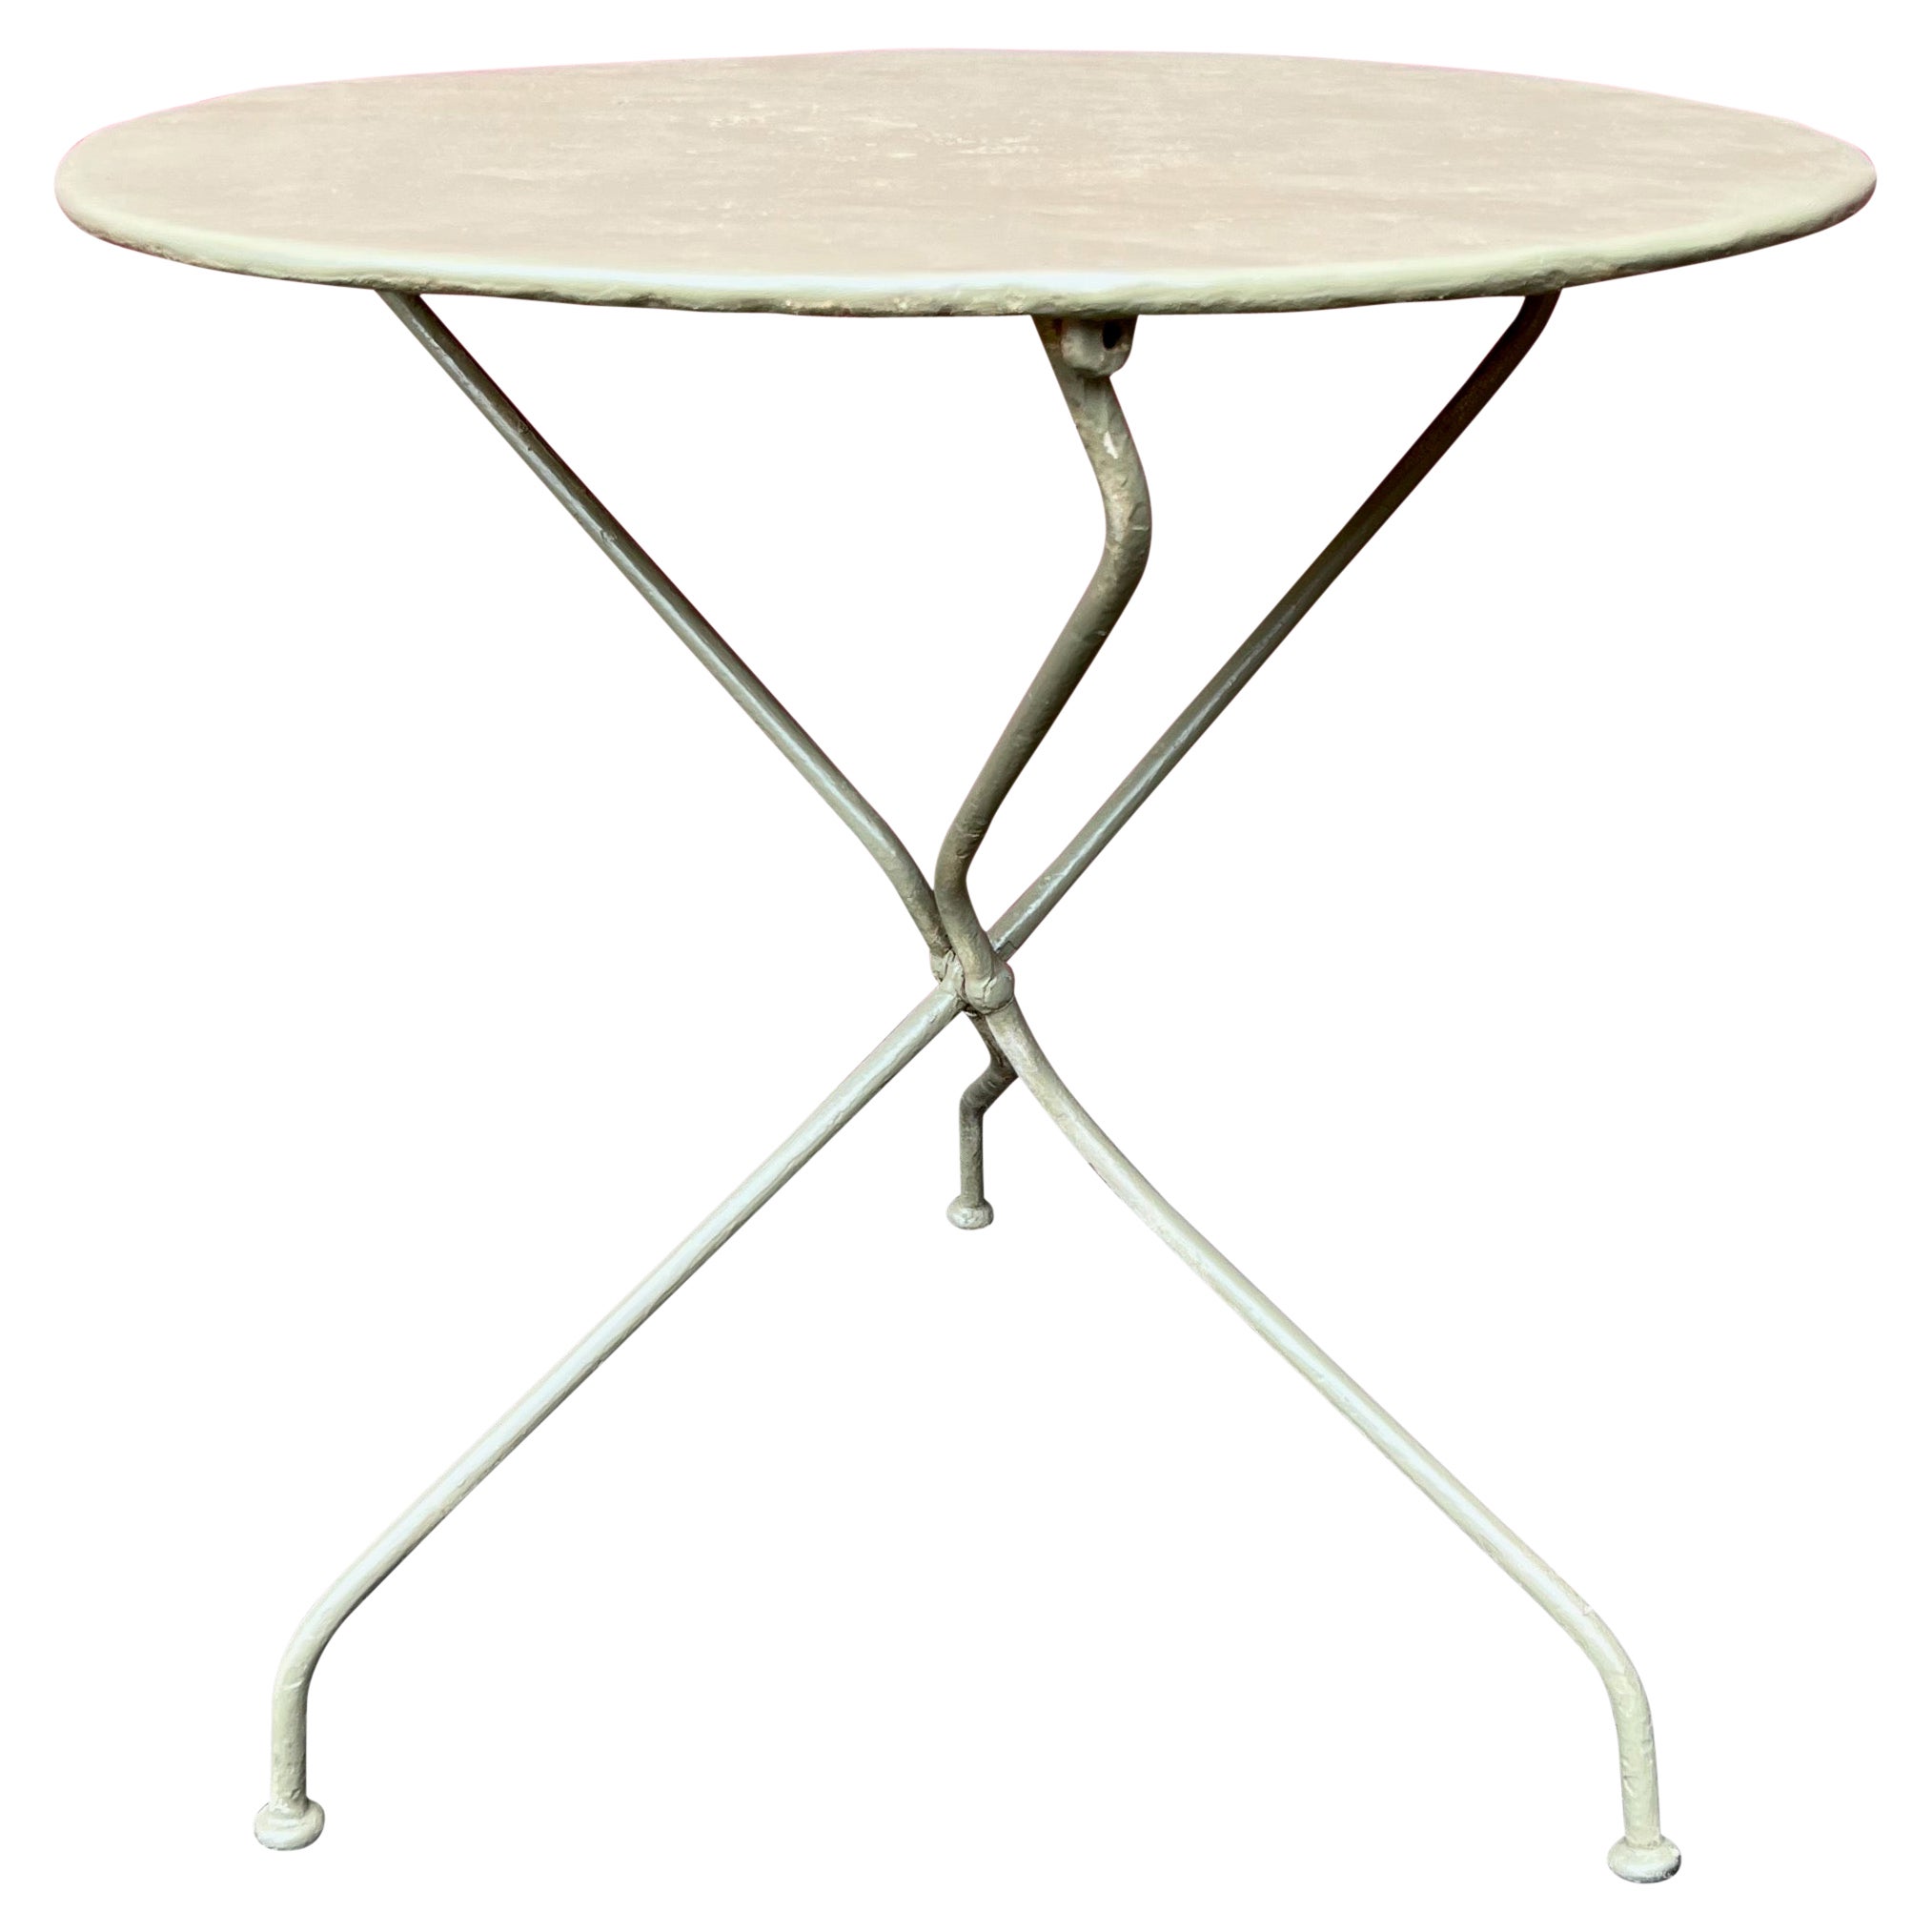 Small Green Painted Folding French Bistro Table For Sale